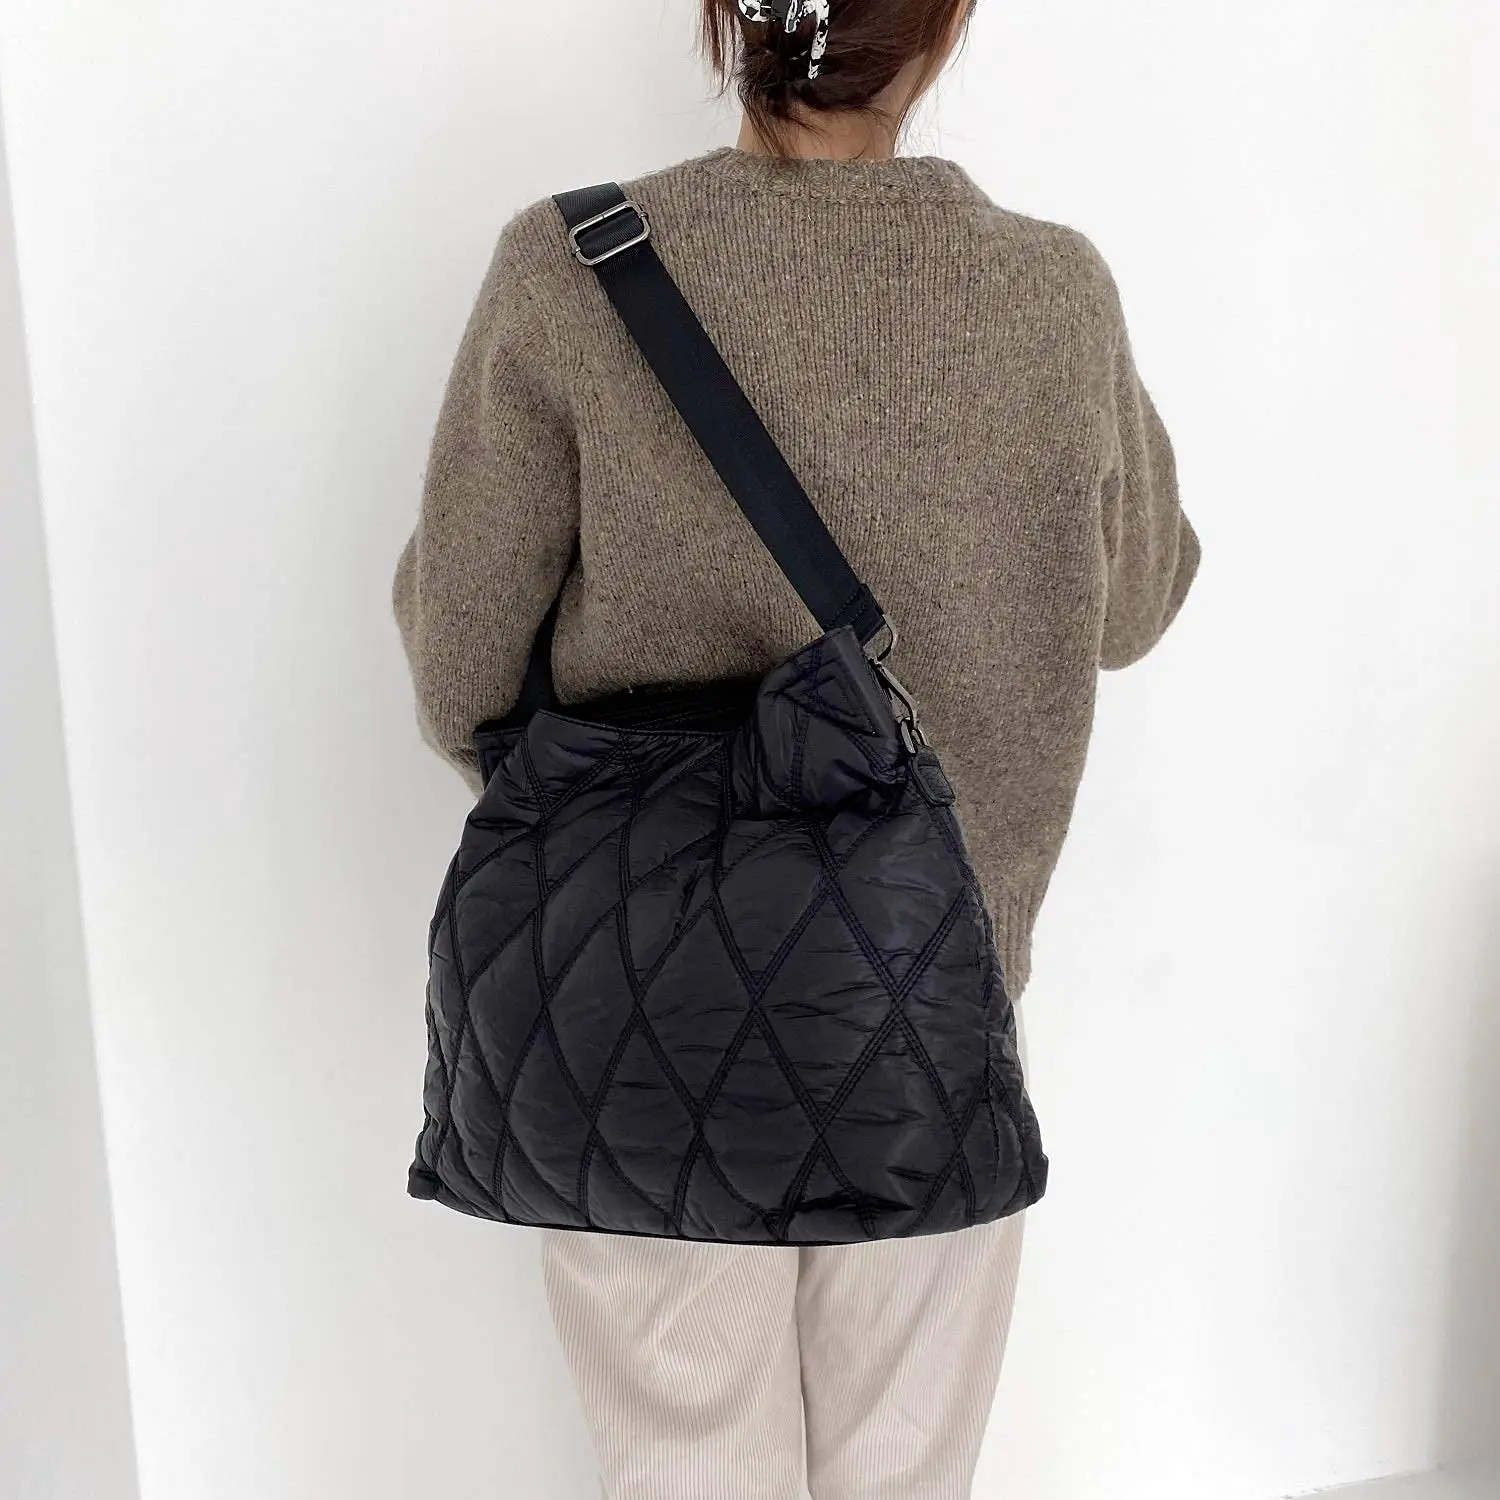 quilted handbags